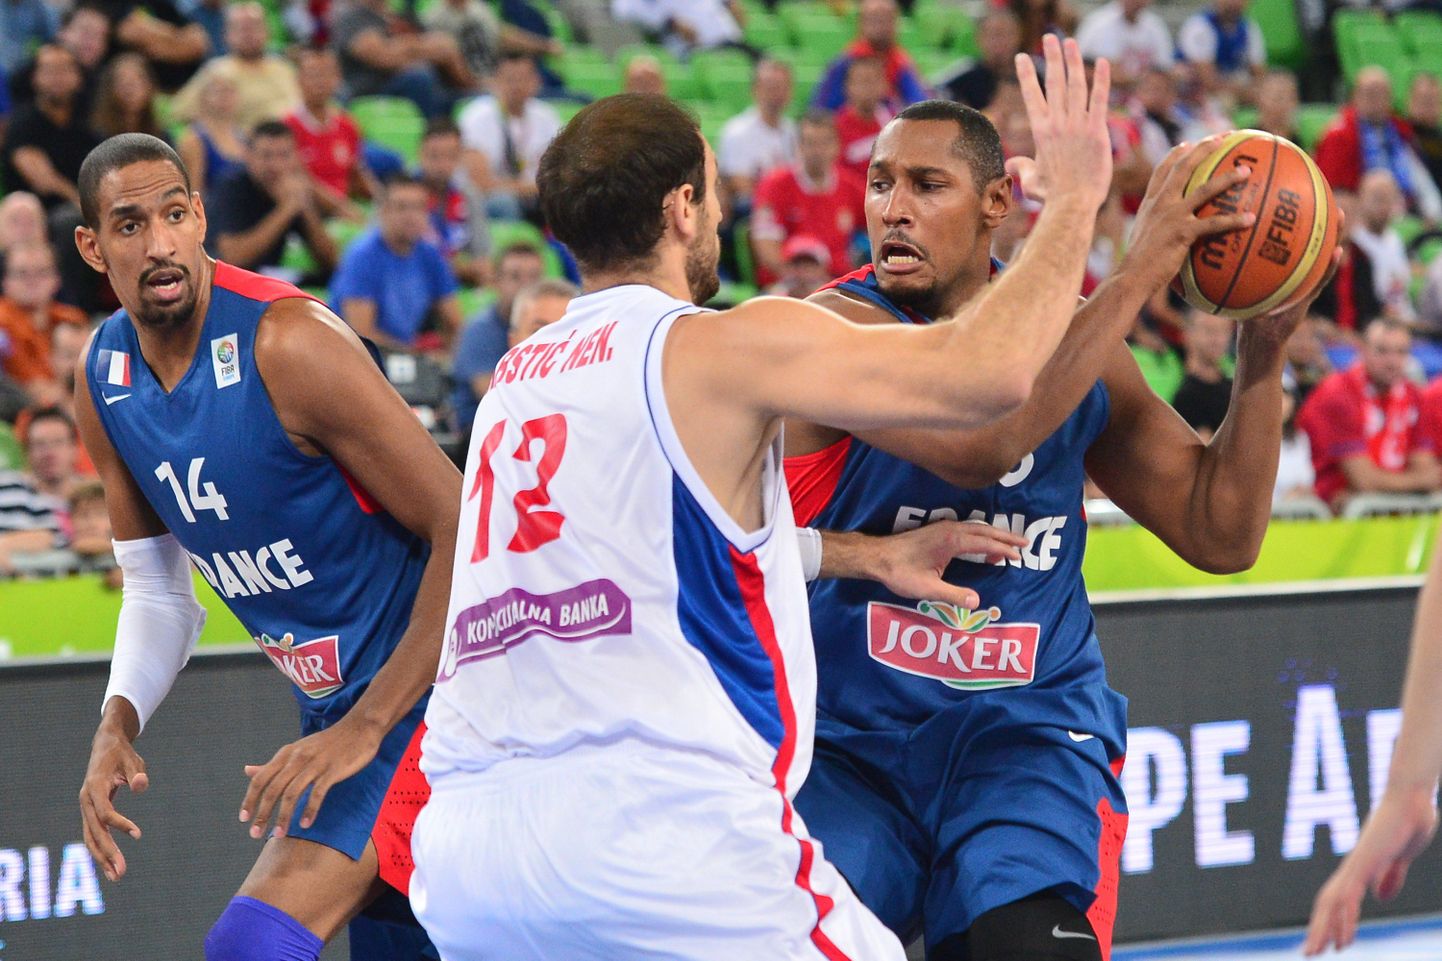 Boris Diaw (R) of France vies with Nenad Krstic (C) of Serbia during the FIBA European basketball championship second round match between Serbia and France in Ljubljana, Slovenia, on September 15, 2013. AFP PHOTO / JURE MAKOVEC